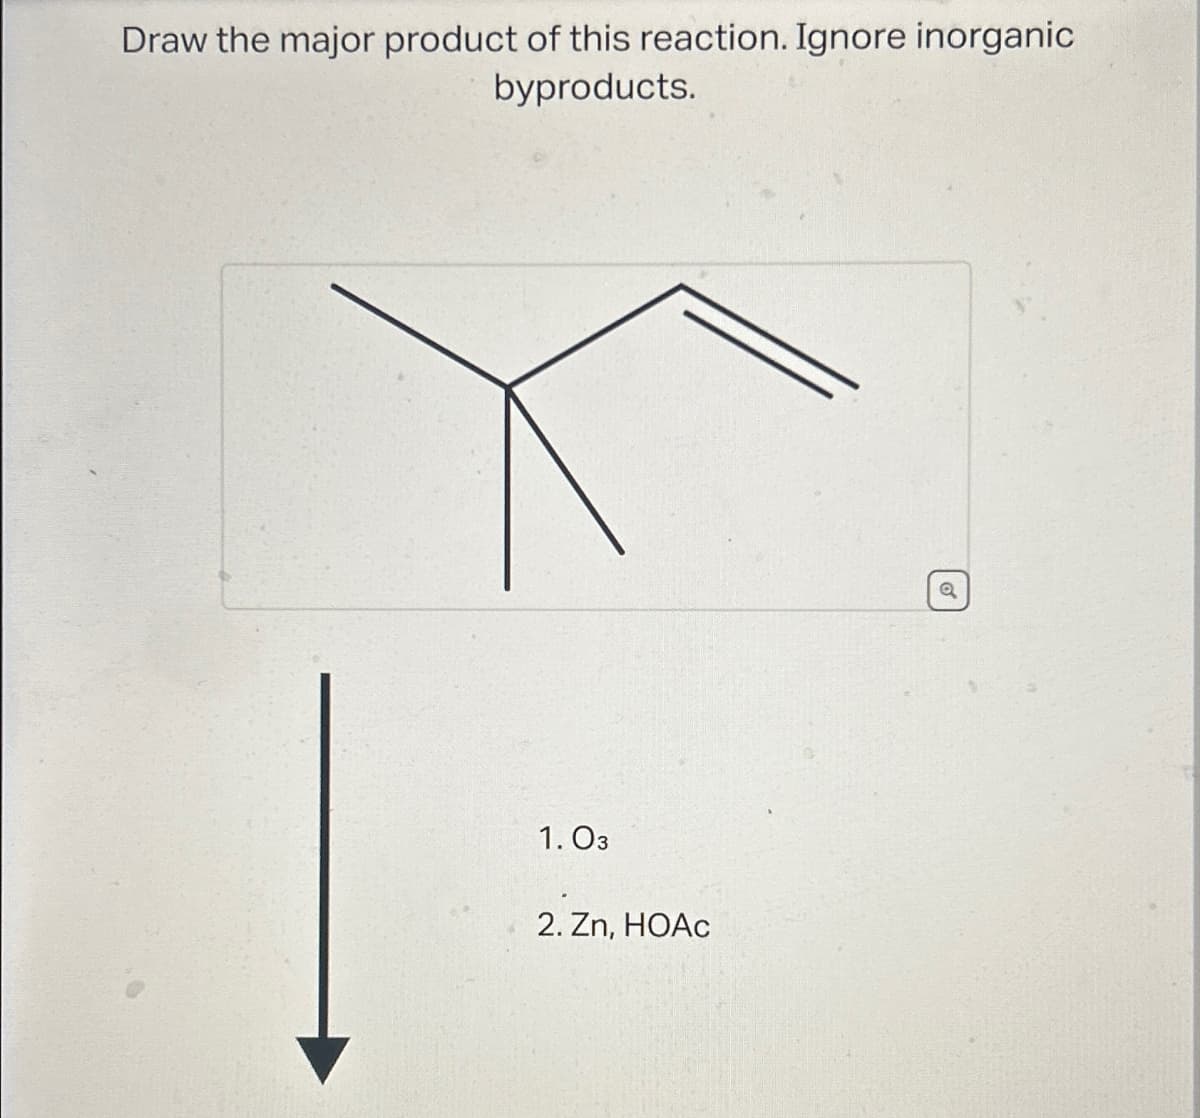 Draw the major product of this reaction. Ignore inorganic
byproducts.
1. 03
2. Zn, HOAc
a